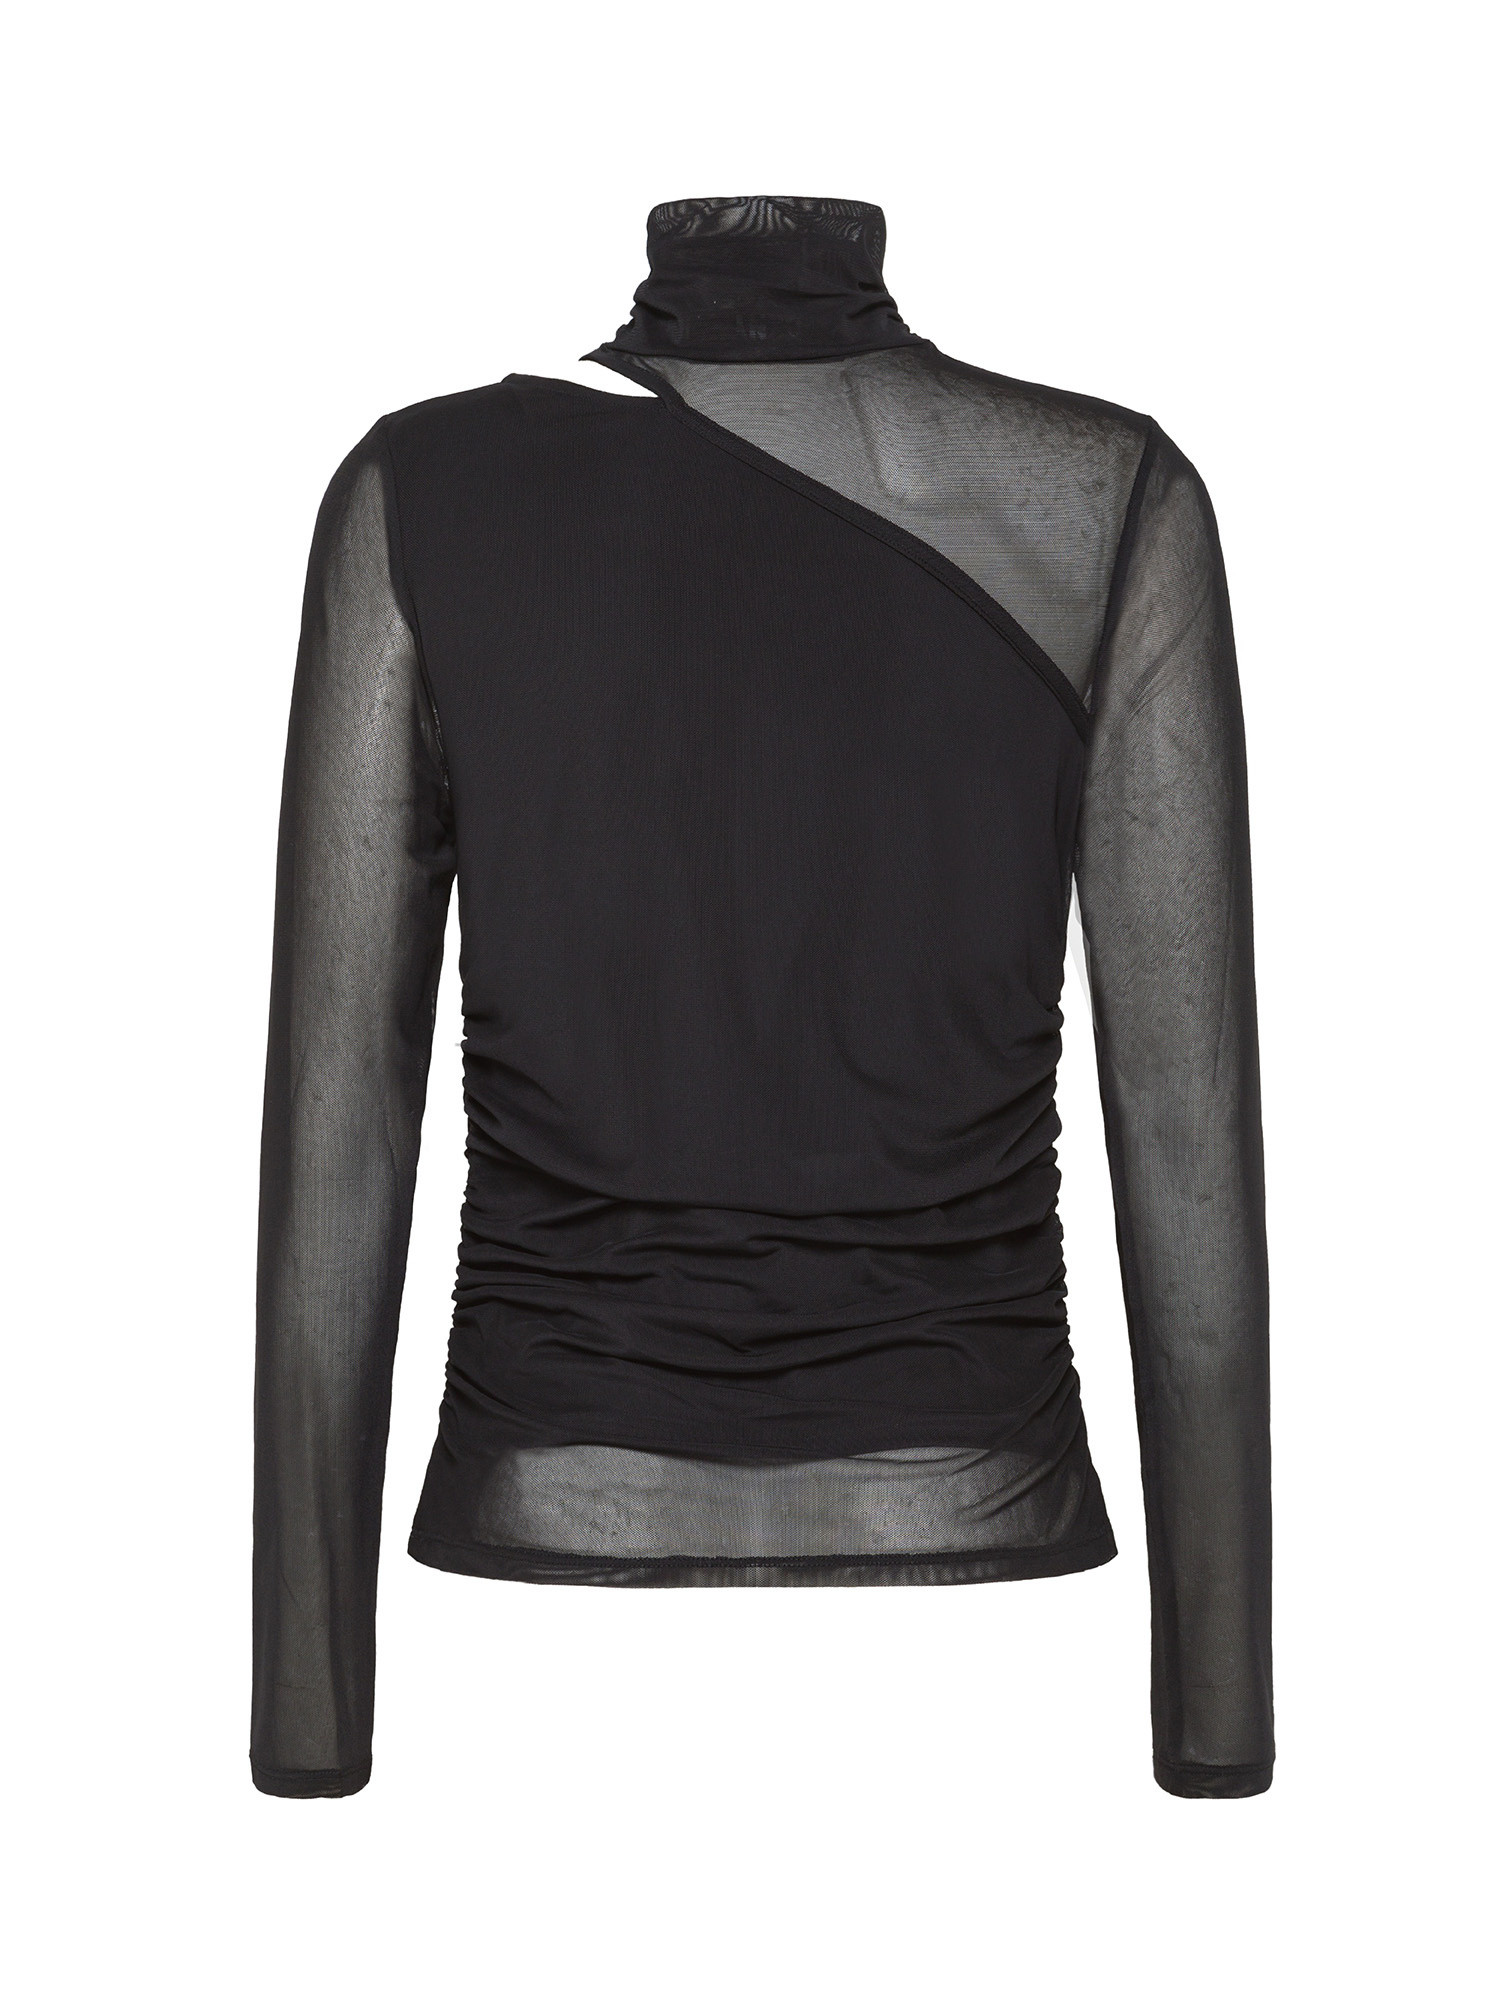 DKNY - Mesh sweater with cut out detail, Black, large image number 1